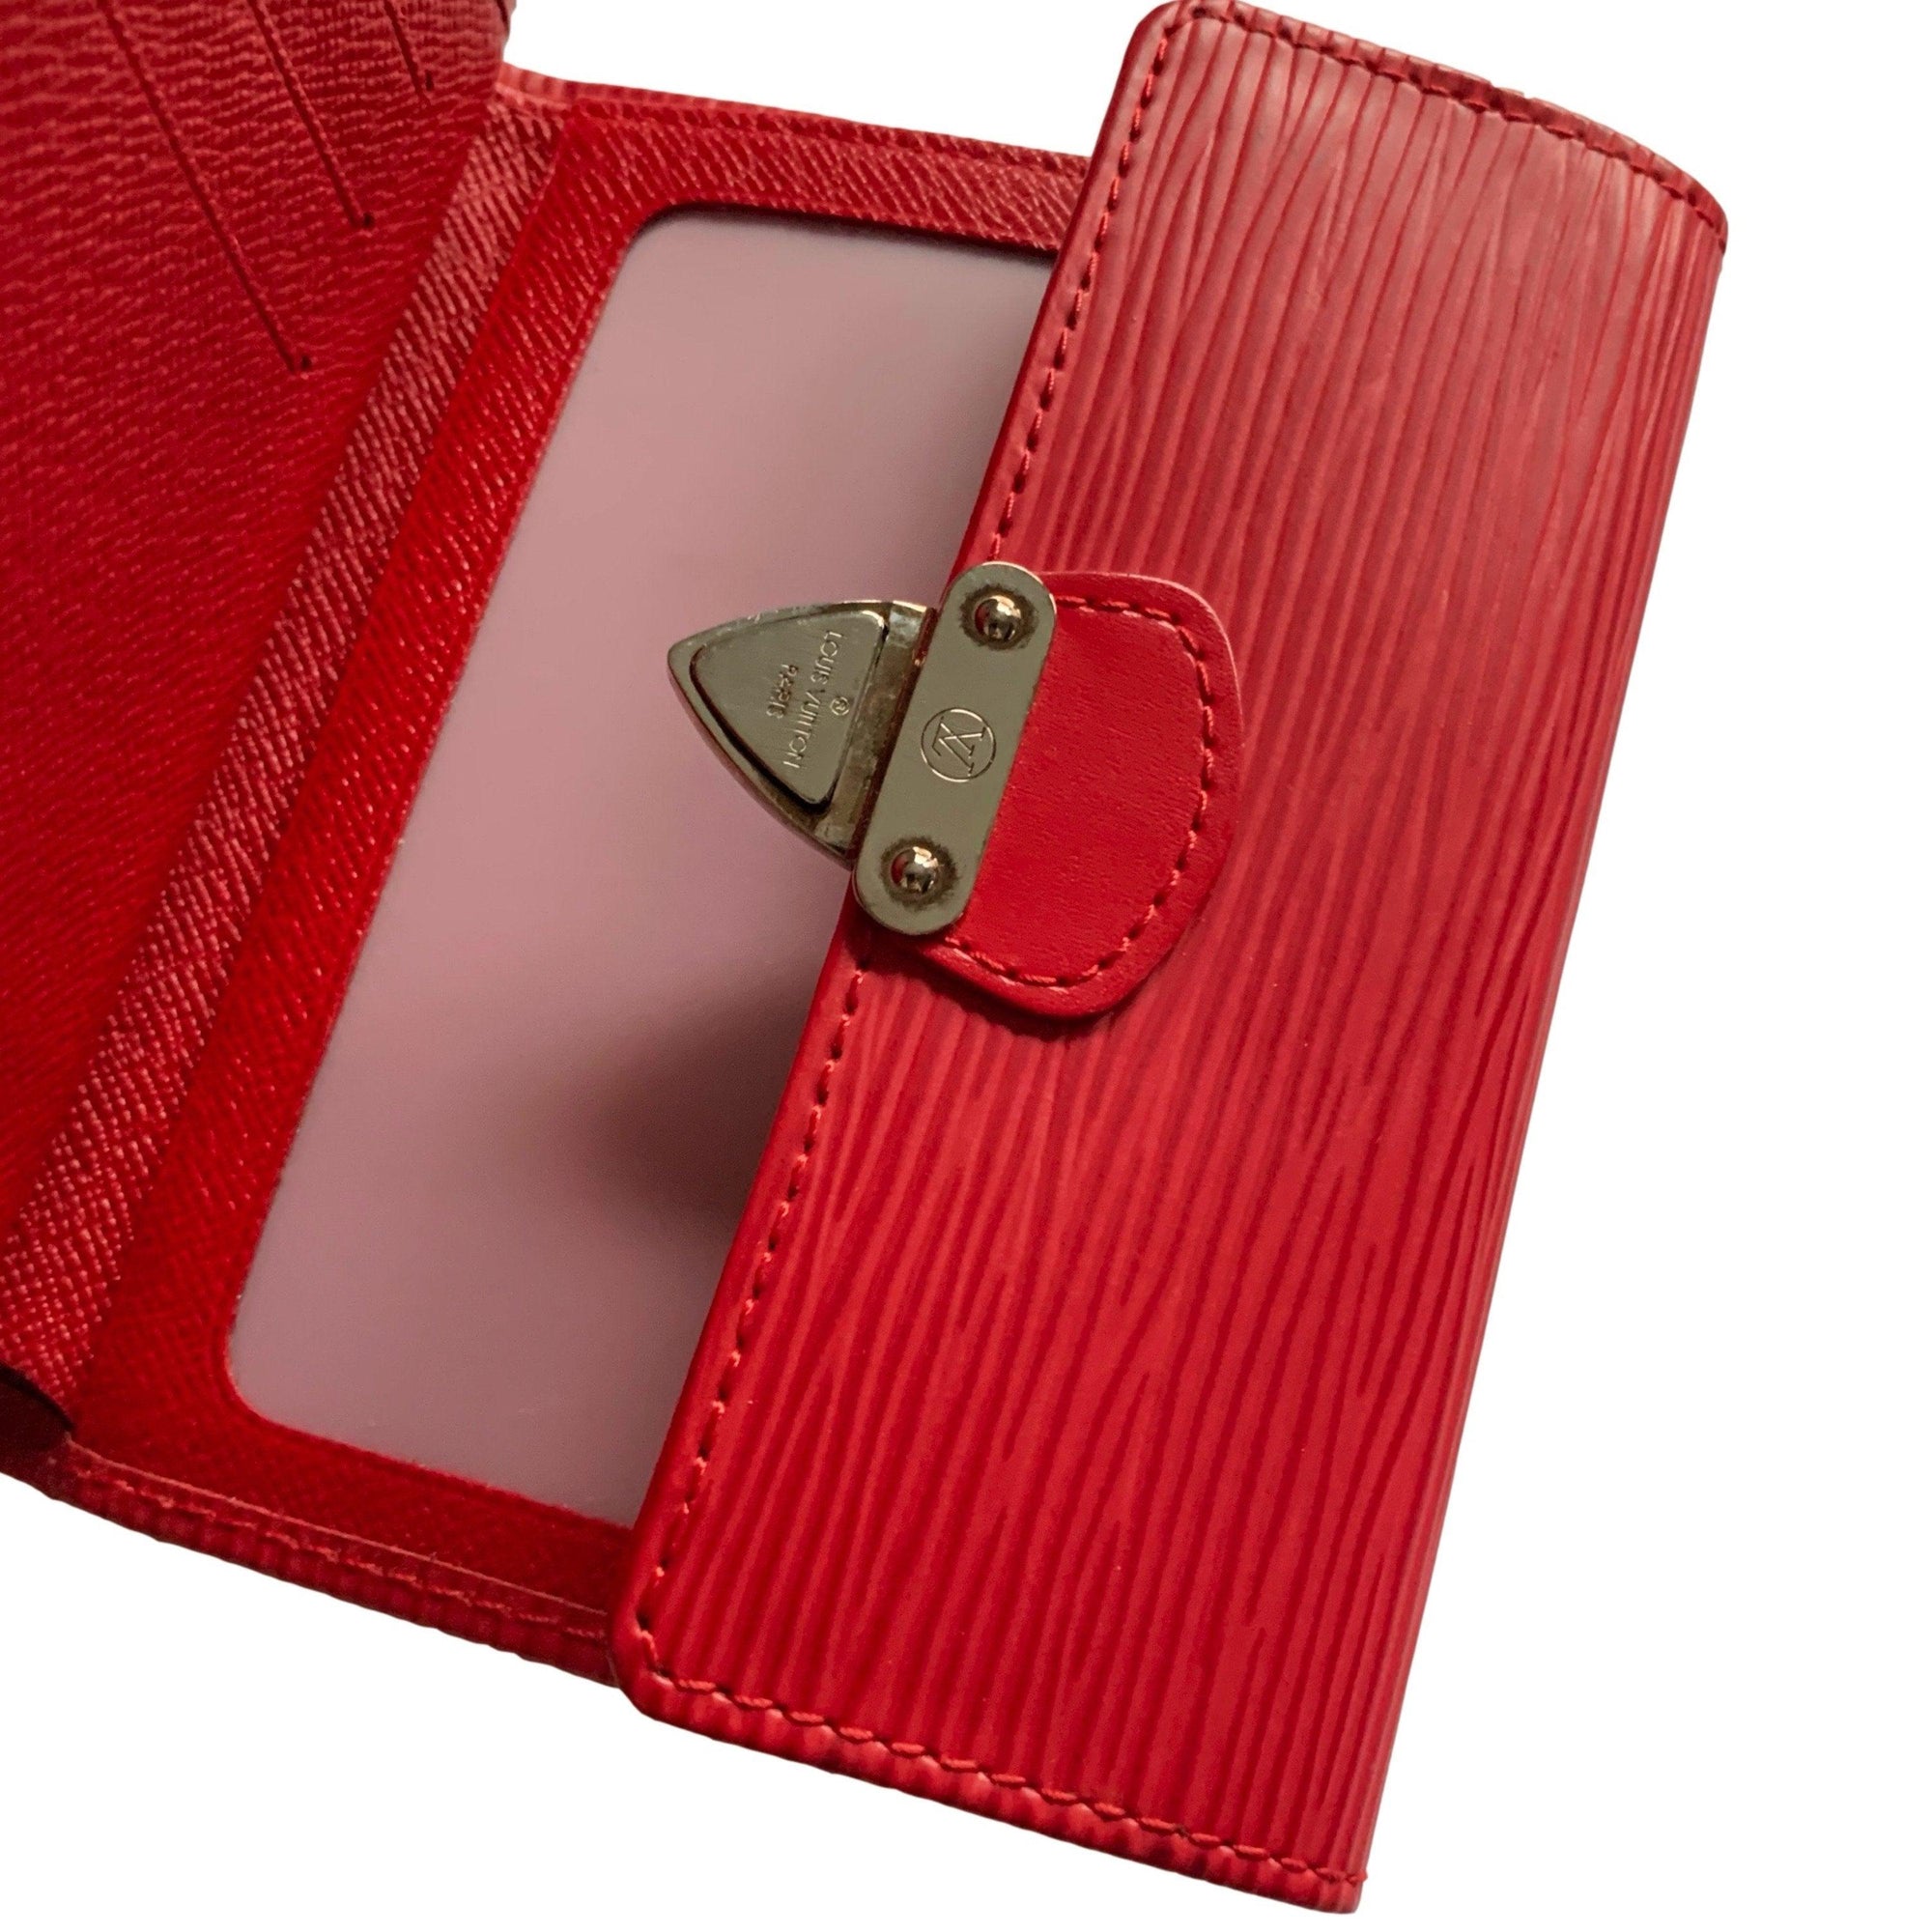 Louis Vuitton Red Epi Leather Wallet - Accessories